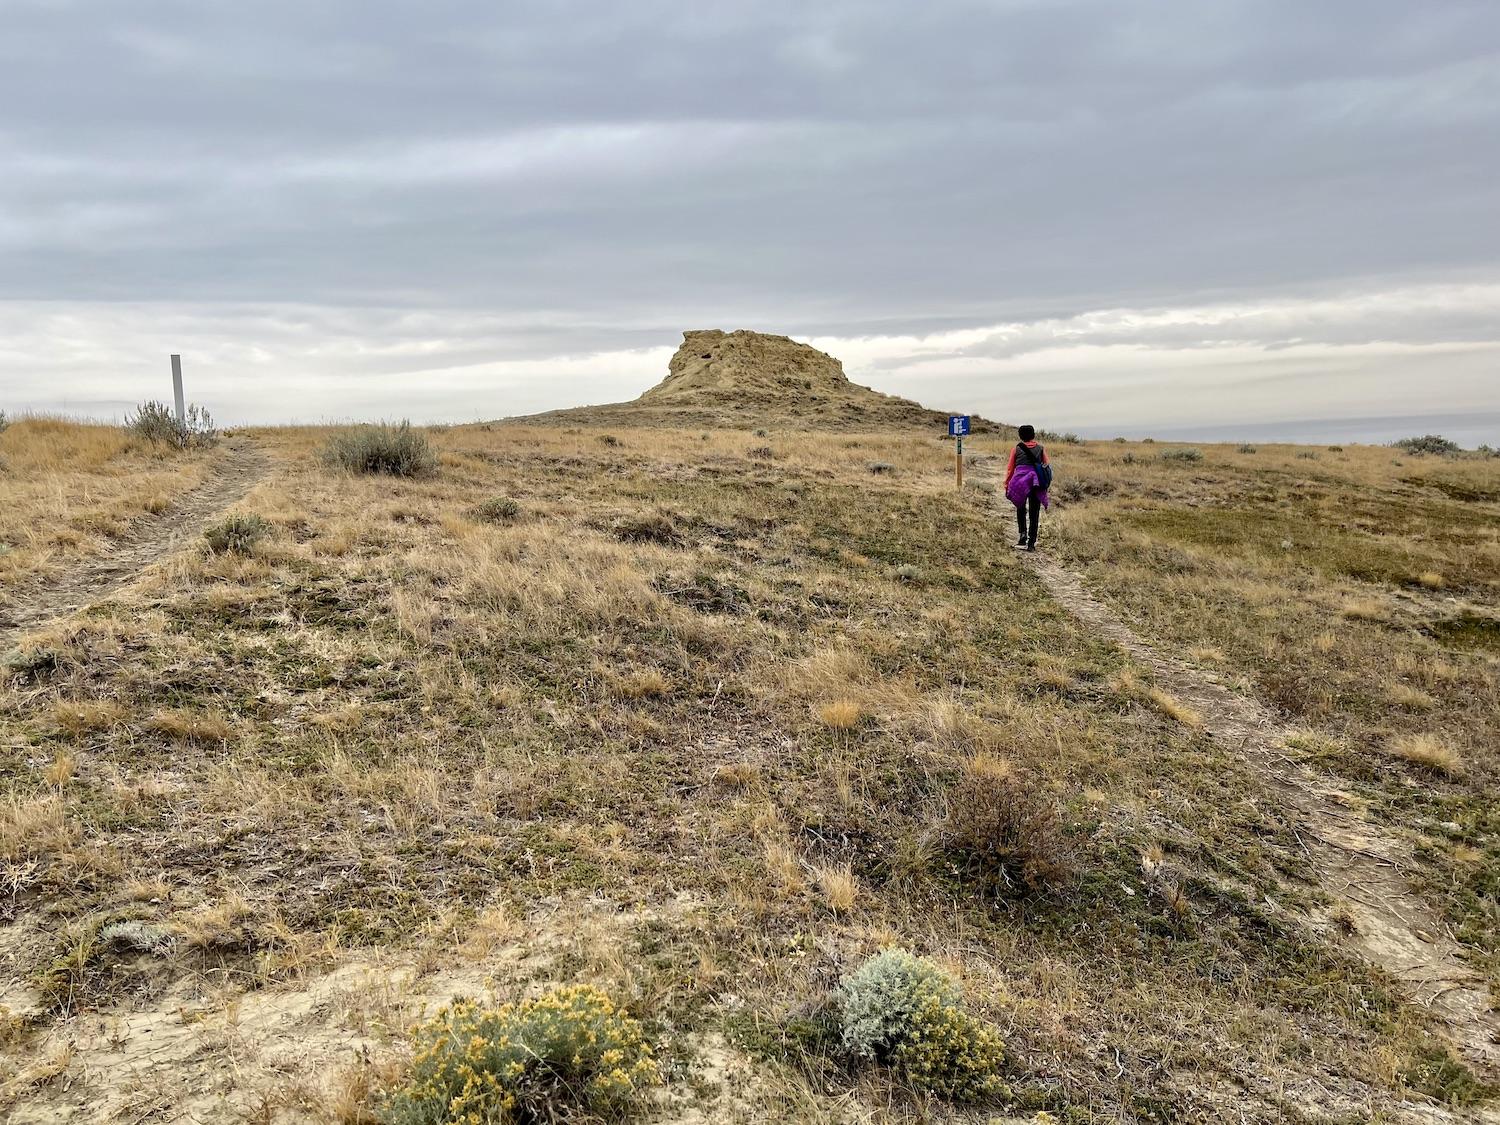 If you come at the "Apple Core" (an isolated butte) from the right, you will be surprised to see it's the gateway to the badlands.